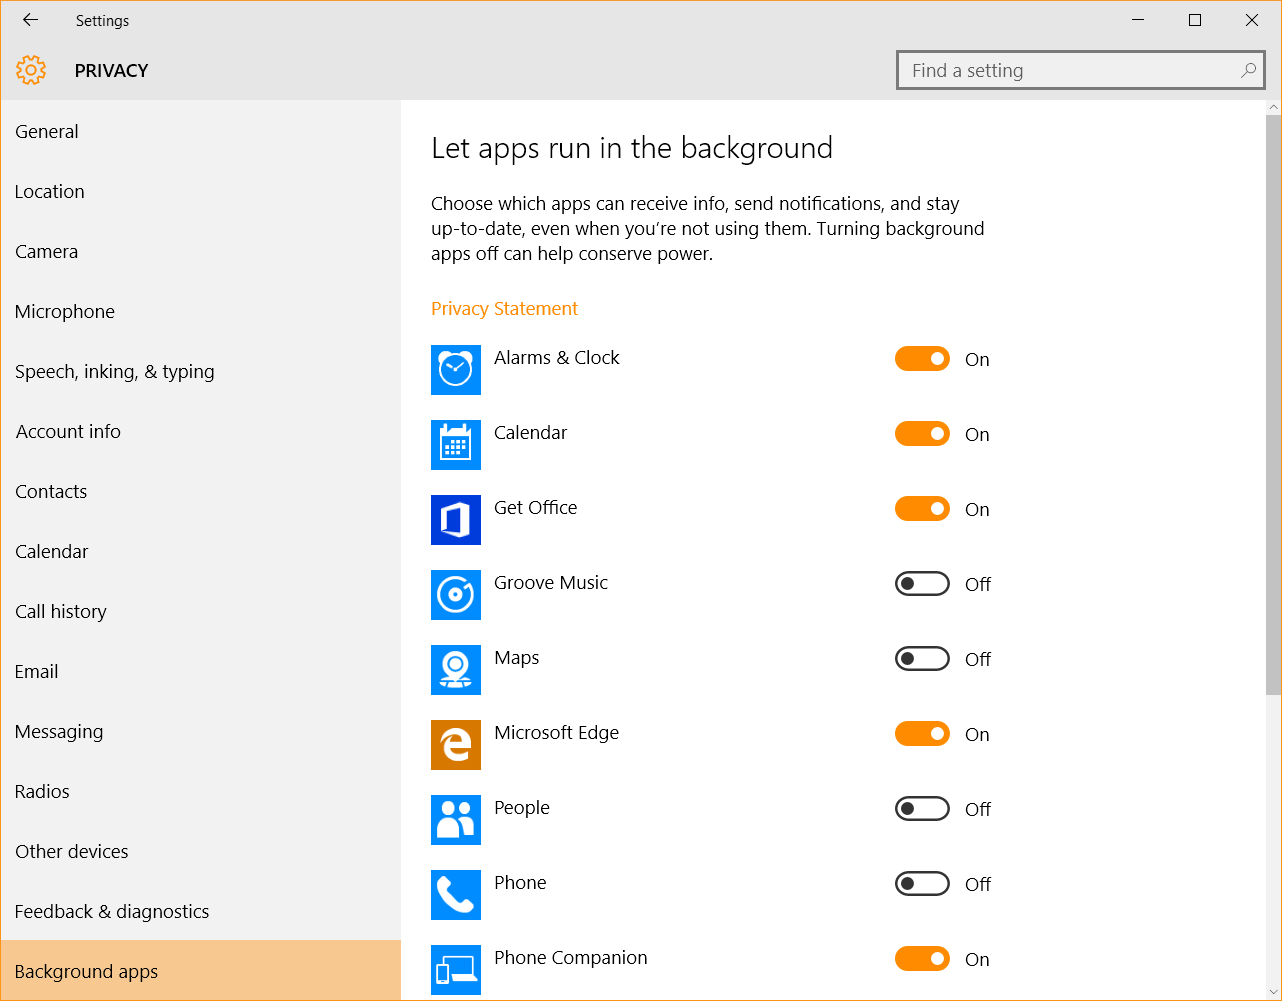 Windows 10 Security Guide - Background Apps Privacy Settings